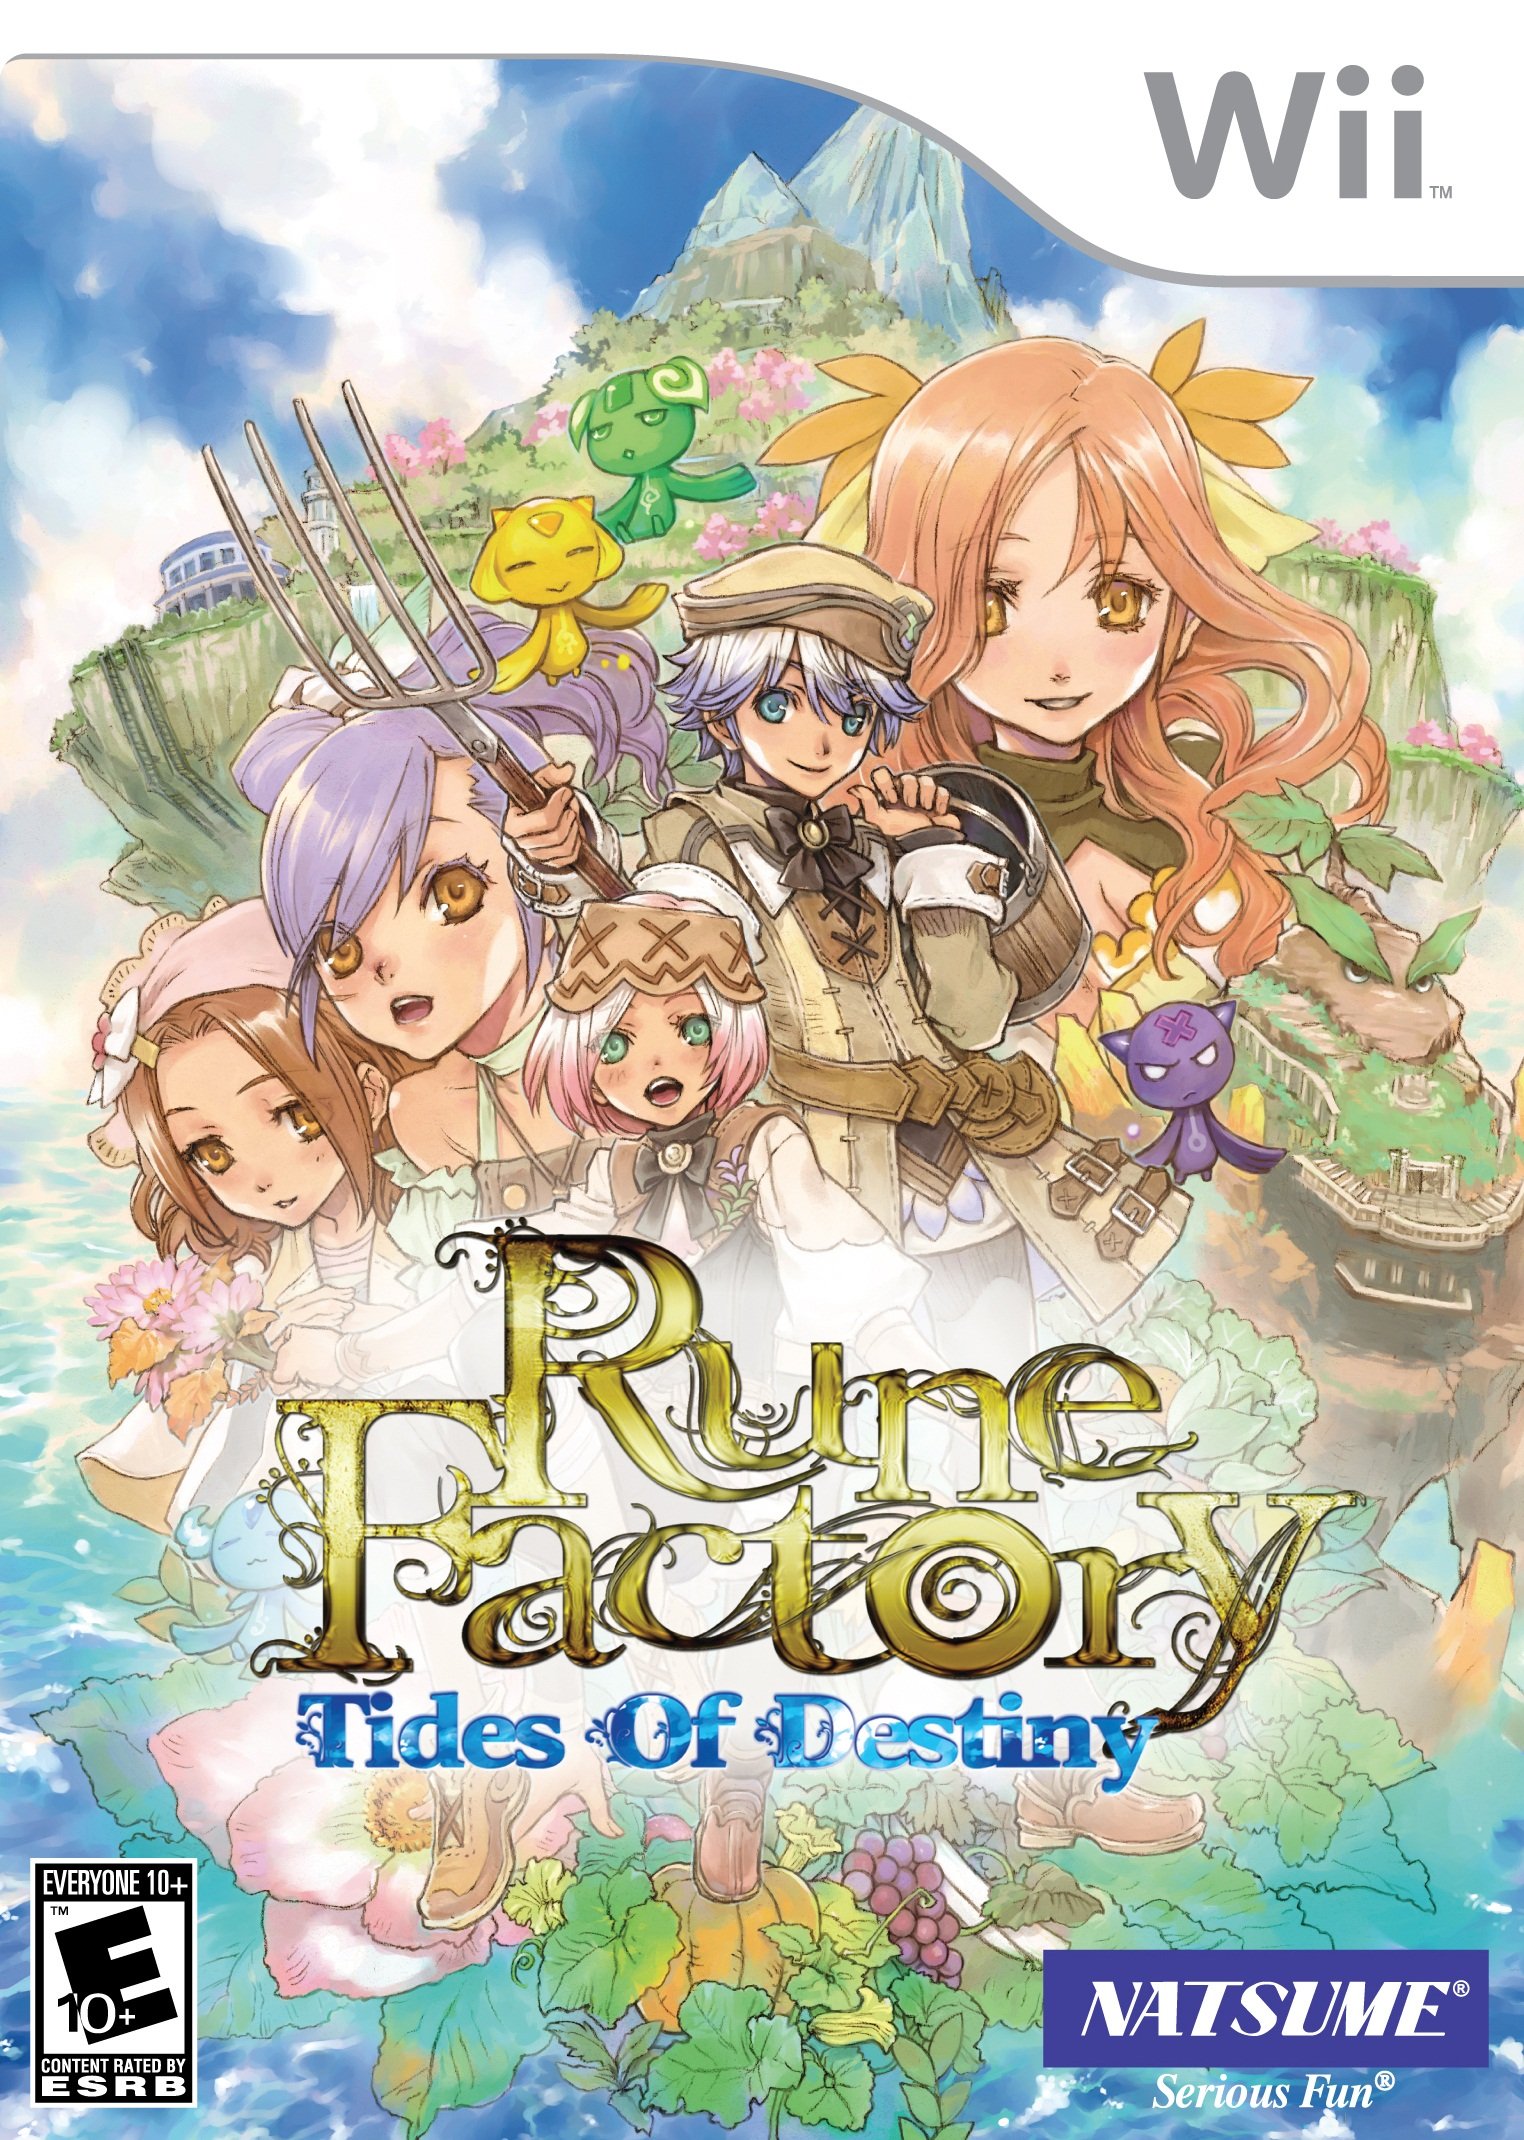 rune-factory-tides-of-destiny-strategywiki-the-video-game-walkthrough-and-strategy-guide-wiki